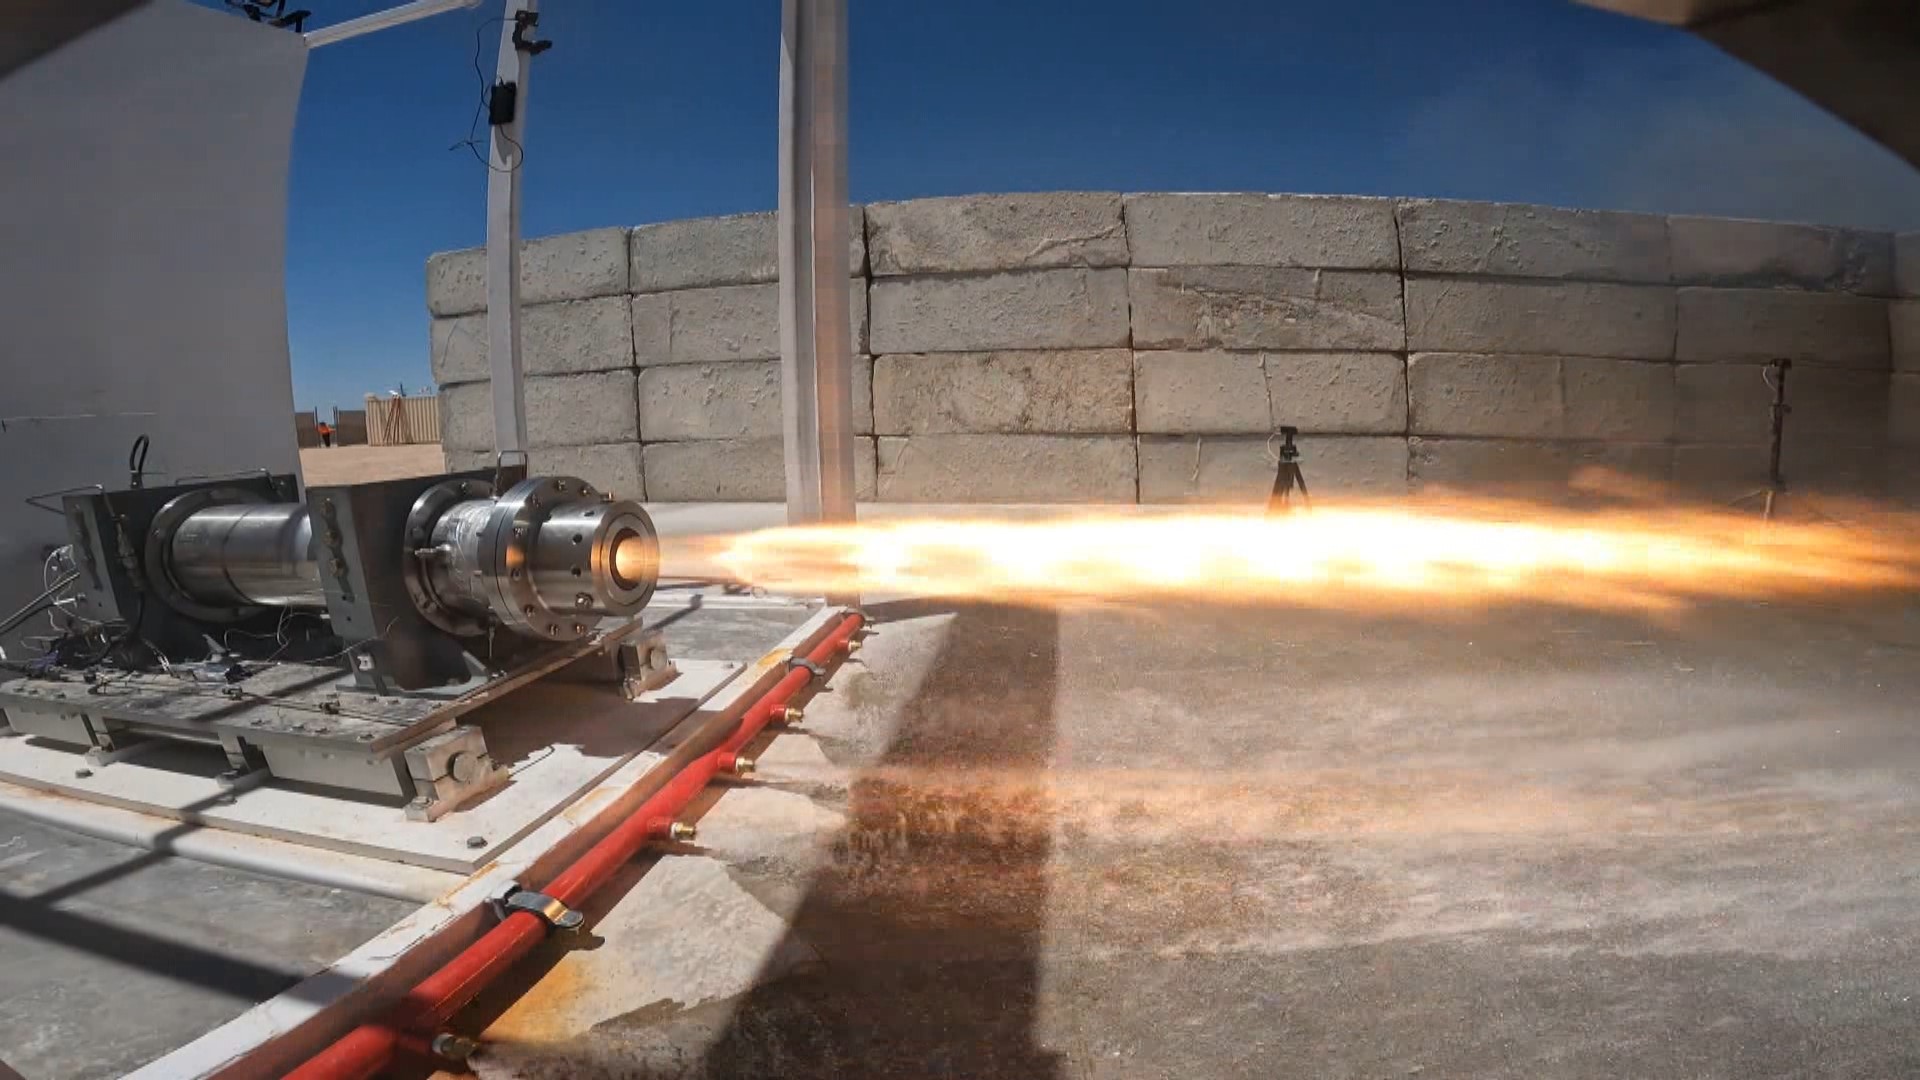 Firehawk broke ground in November 2022. At their testing facility in Midland, they're horizontally testing small and medium-sized rocket engines.